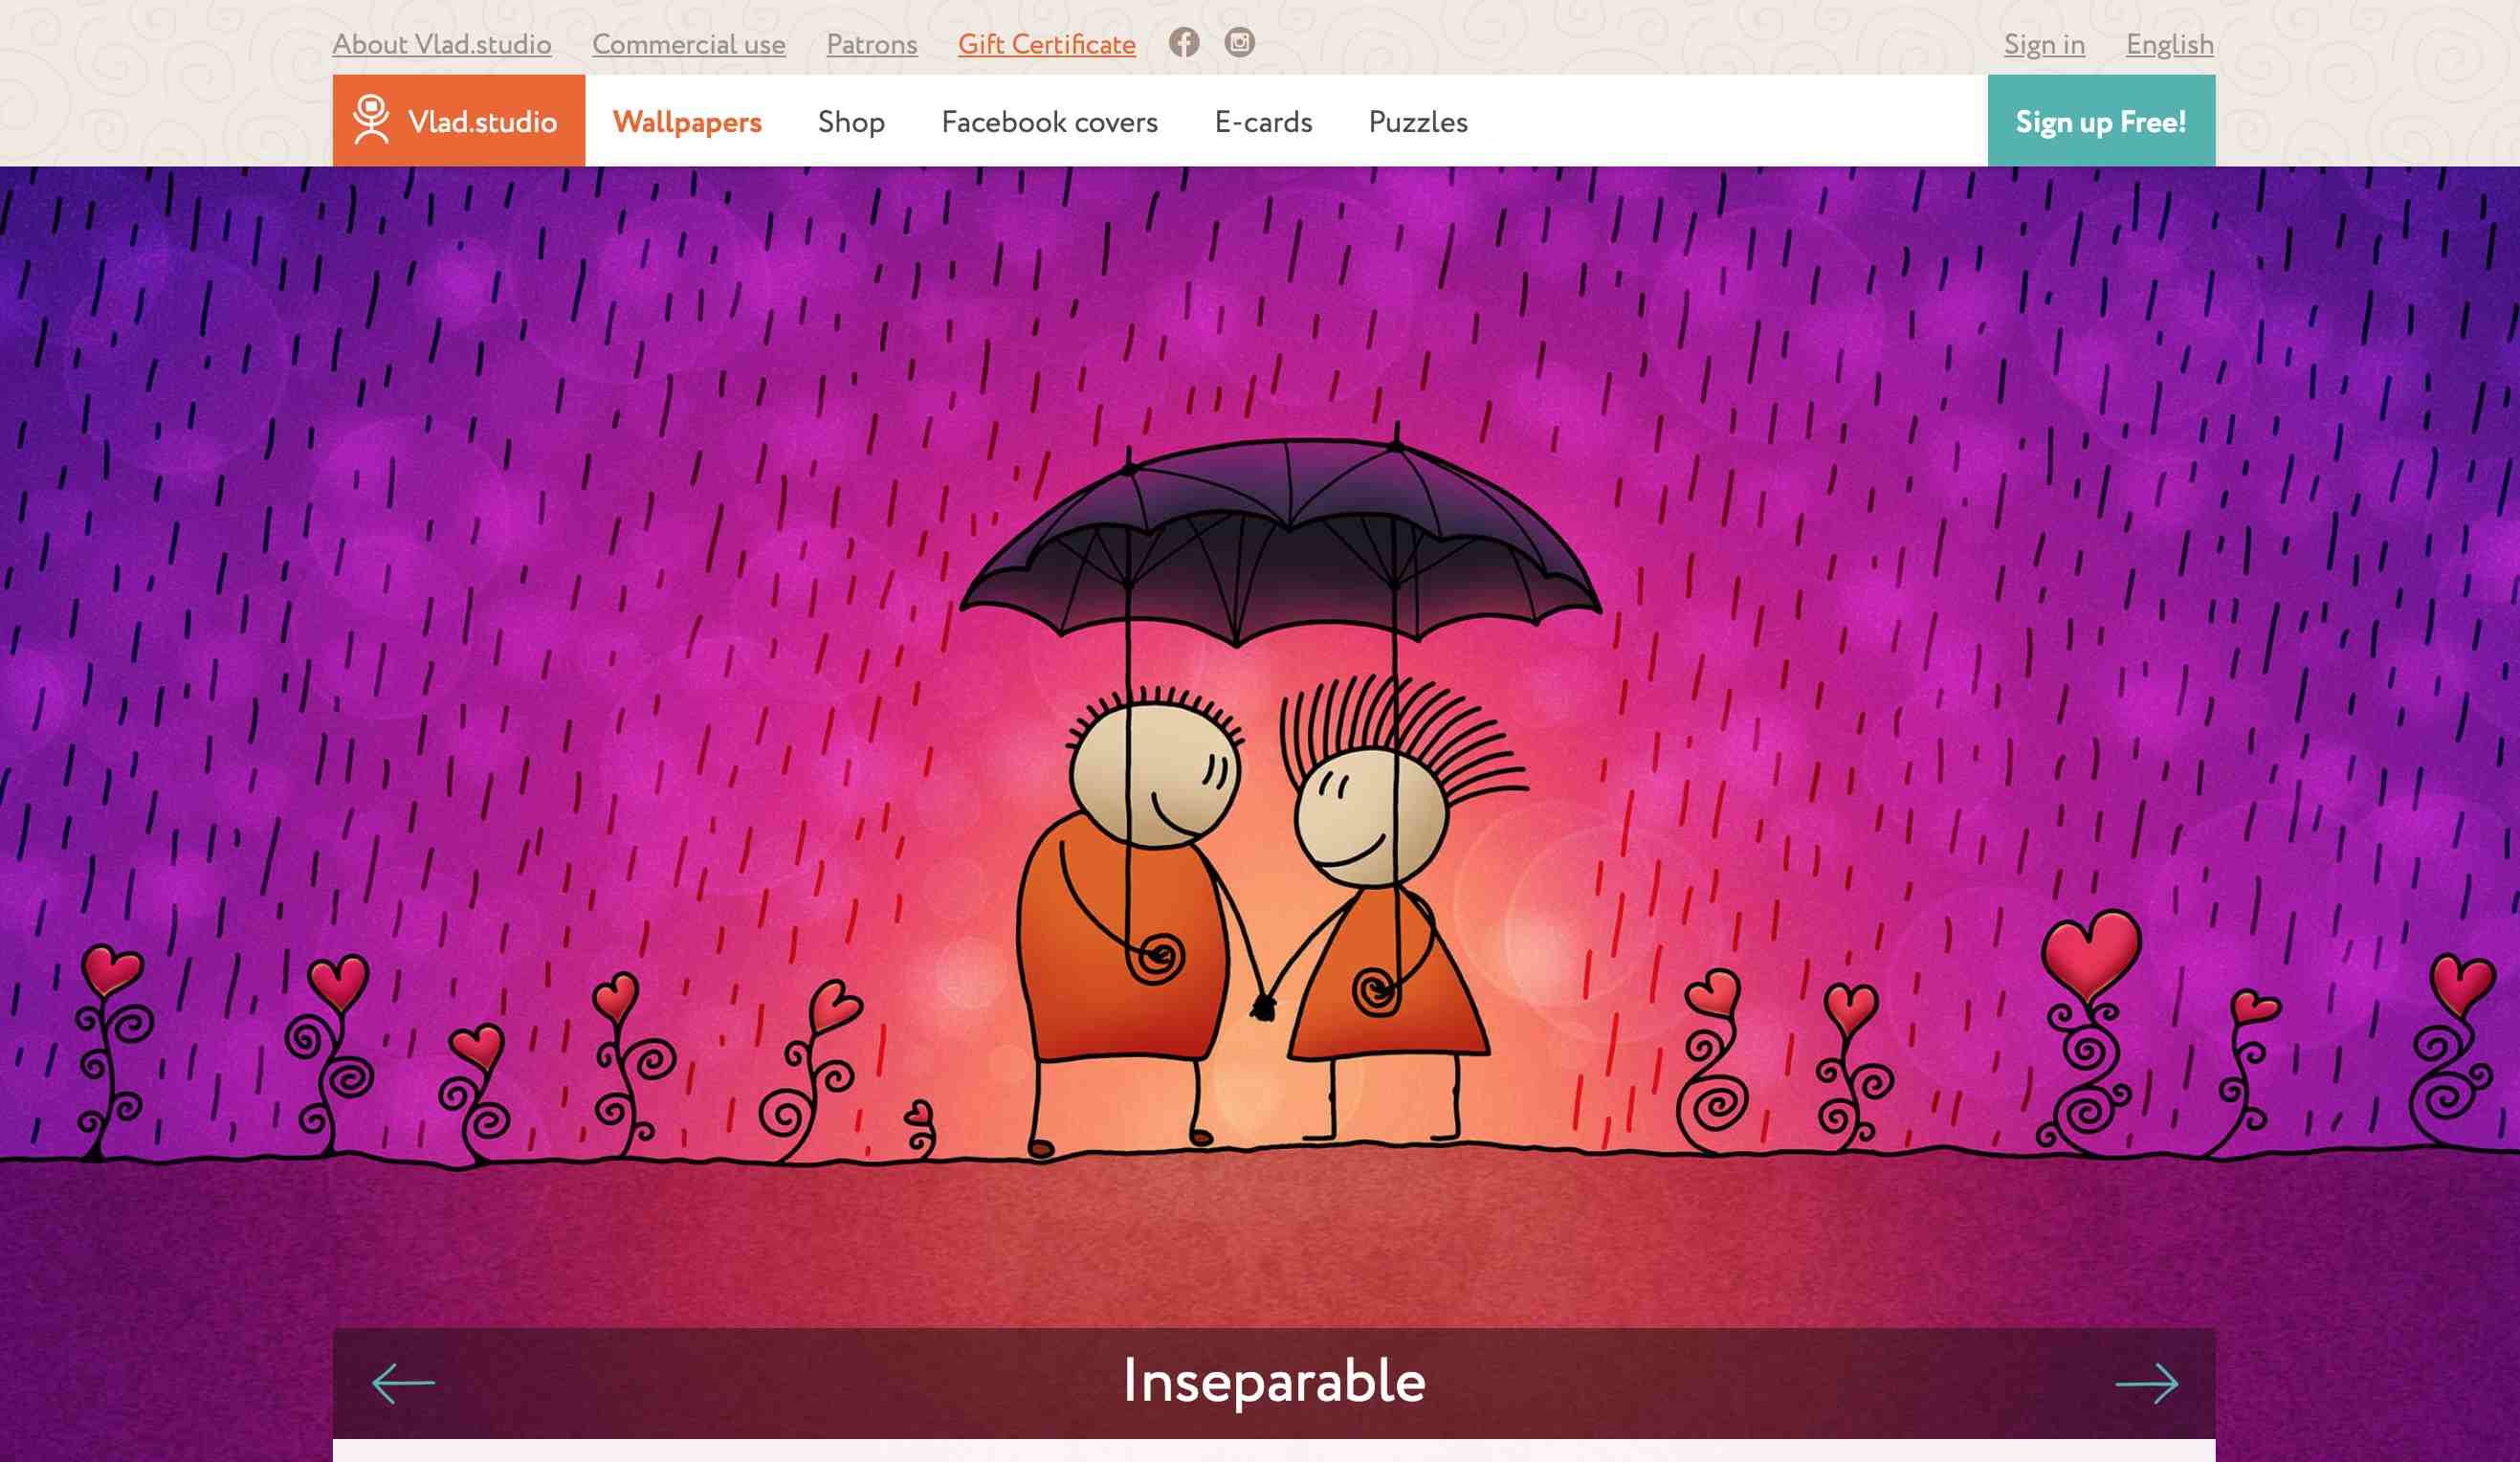 2634x1528 Inseparable wallpaper from Vlad studio. This lovely Valentine's Day ...